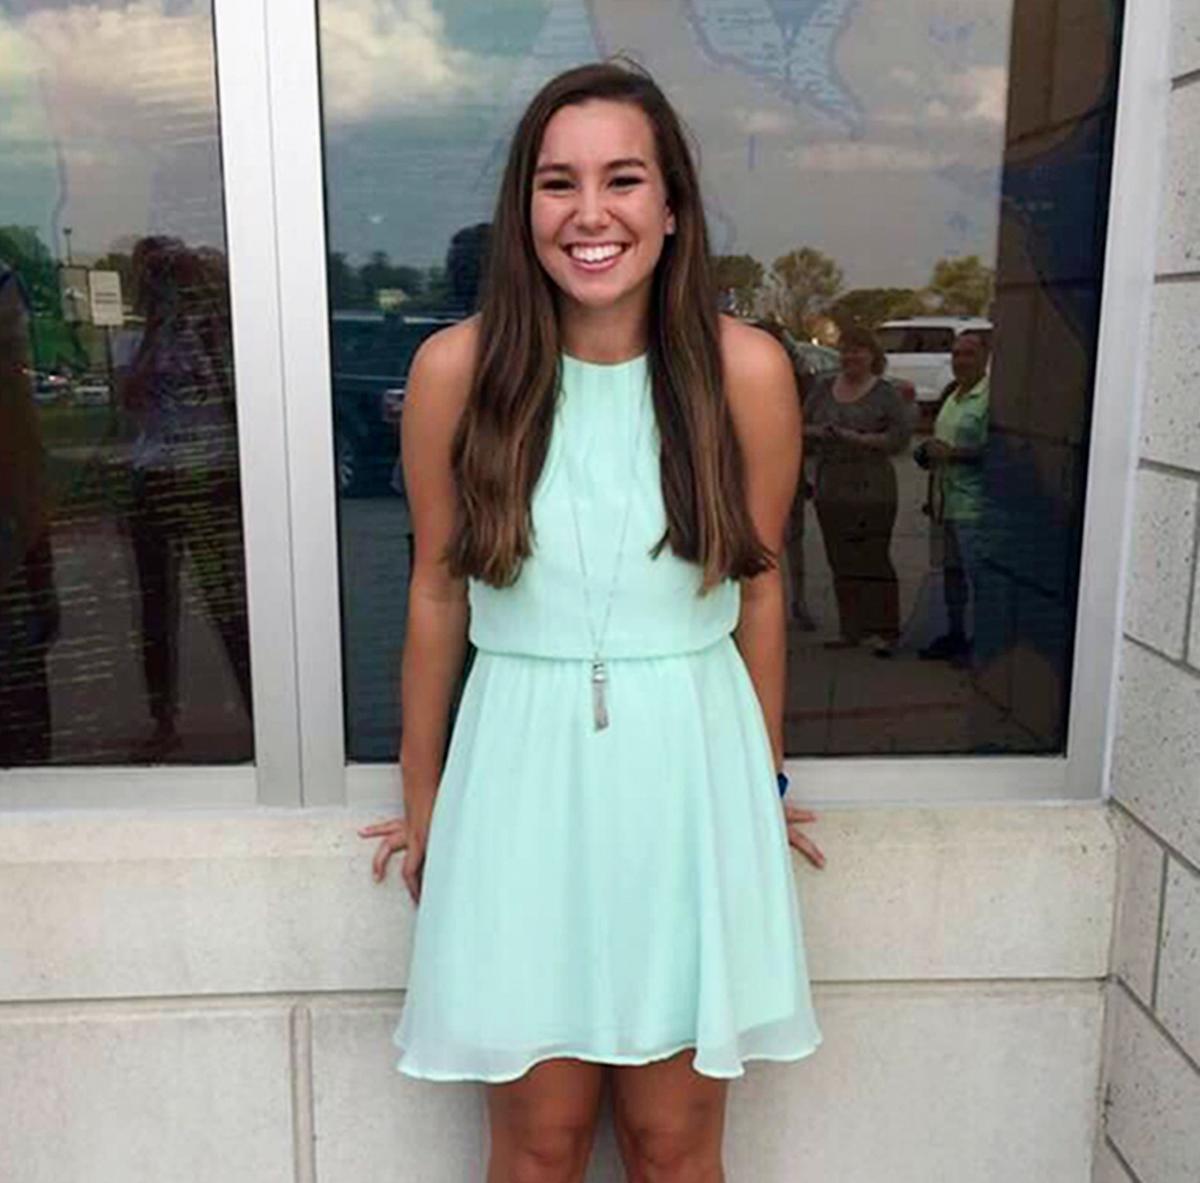 This undated photo released by the Iowa Department of Criminal Investigation shows Mollie Tibbetts, a University of Iowa student who was reported missing from her hometown in the eastern Iowa city of Brooklyn on July 19, 2018. (Iowa Department of Criminal Investigation/AP)